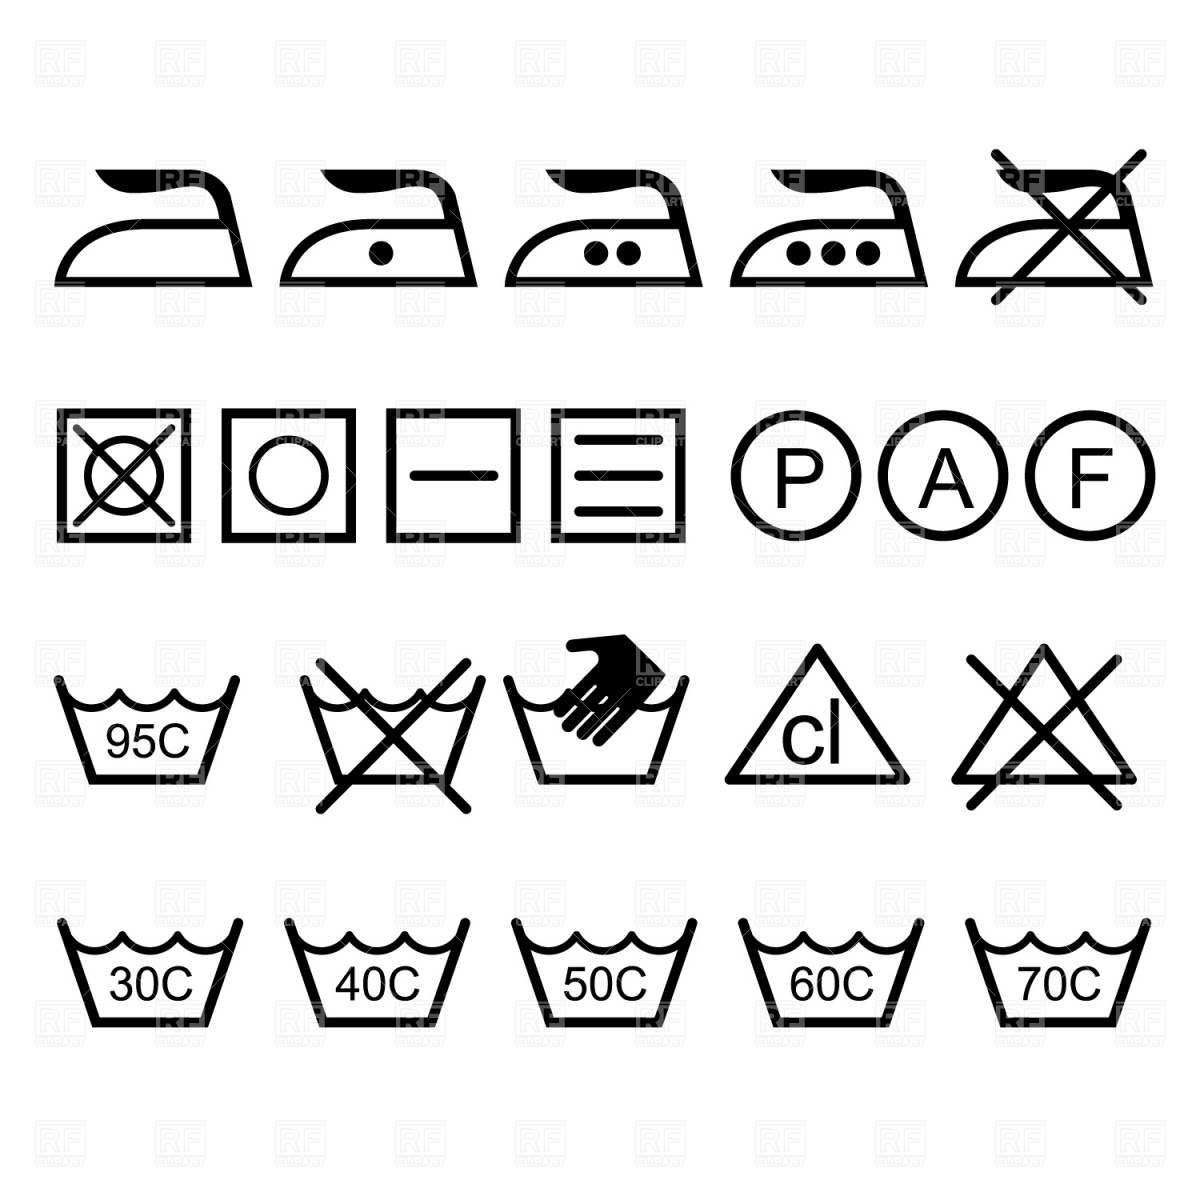 Clipart Catalog   Icons And Emblems   Laundry Icons Download Royalty    